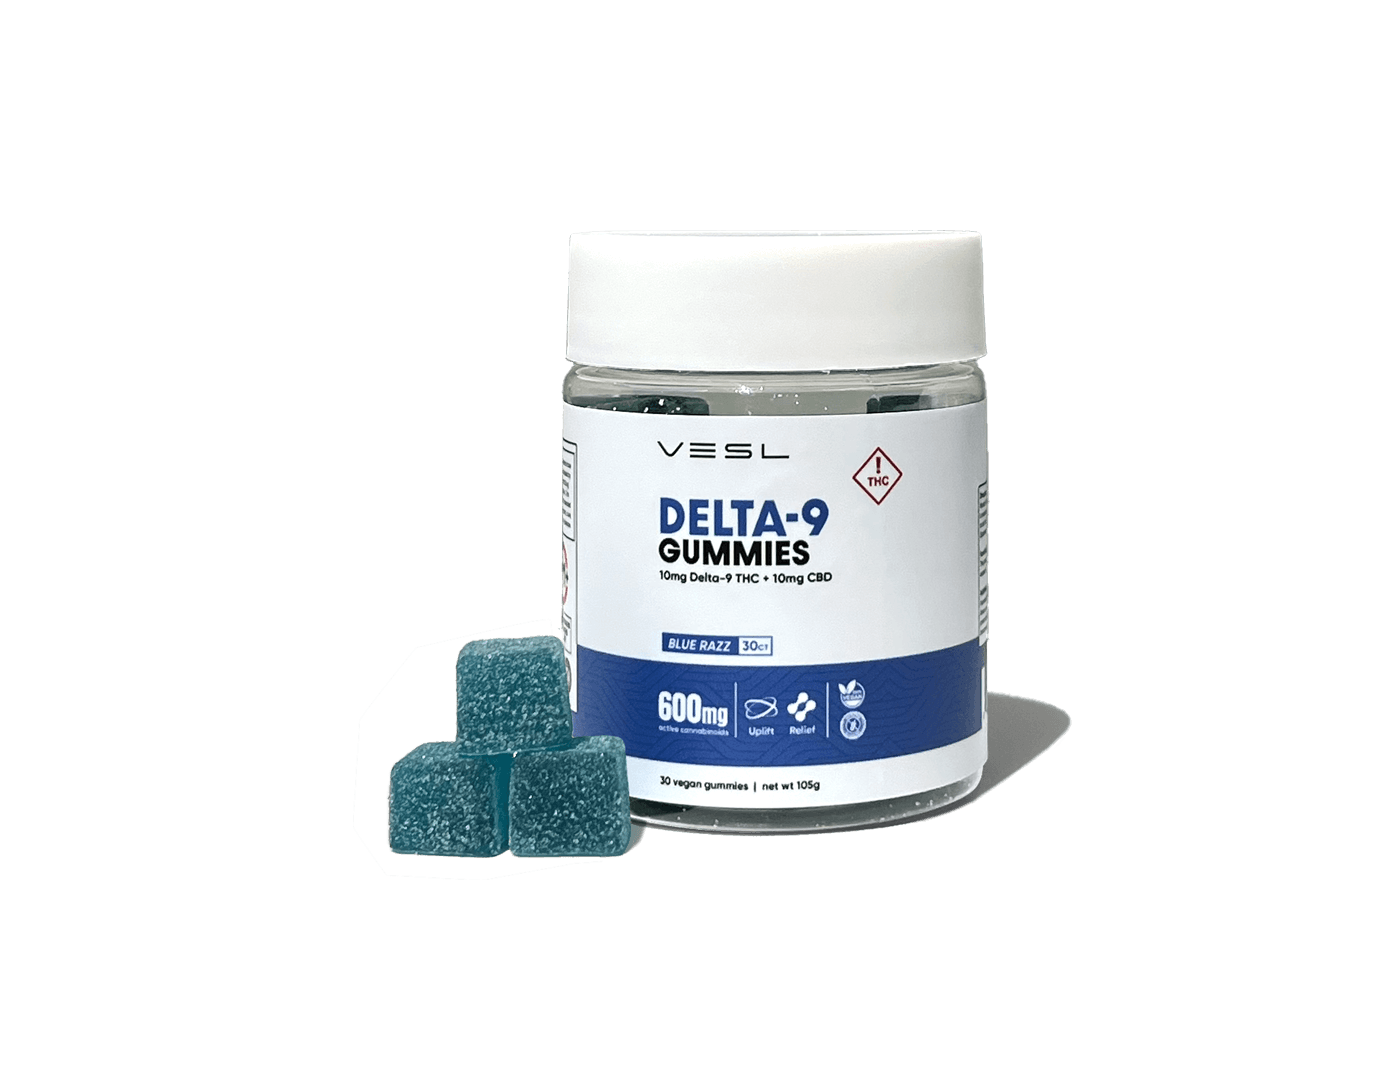 Vesl Oils Delta-9 CBD Gummies with 10mg of CBD each, perfect for promoting wellness and relaxation.